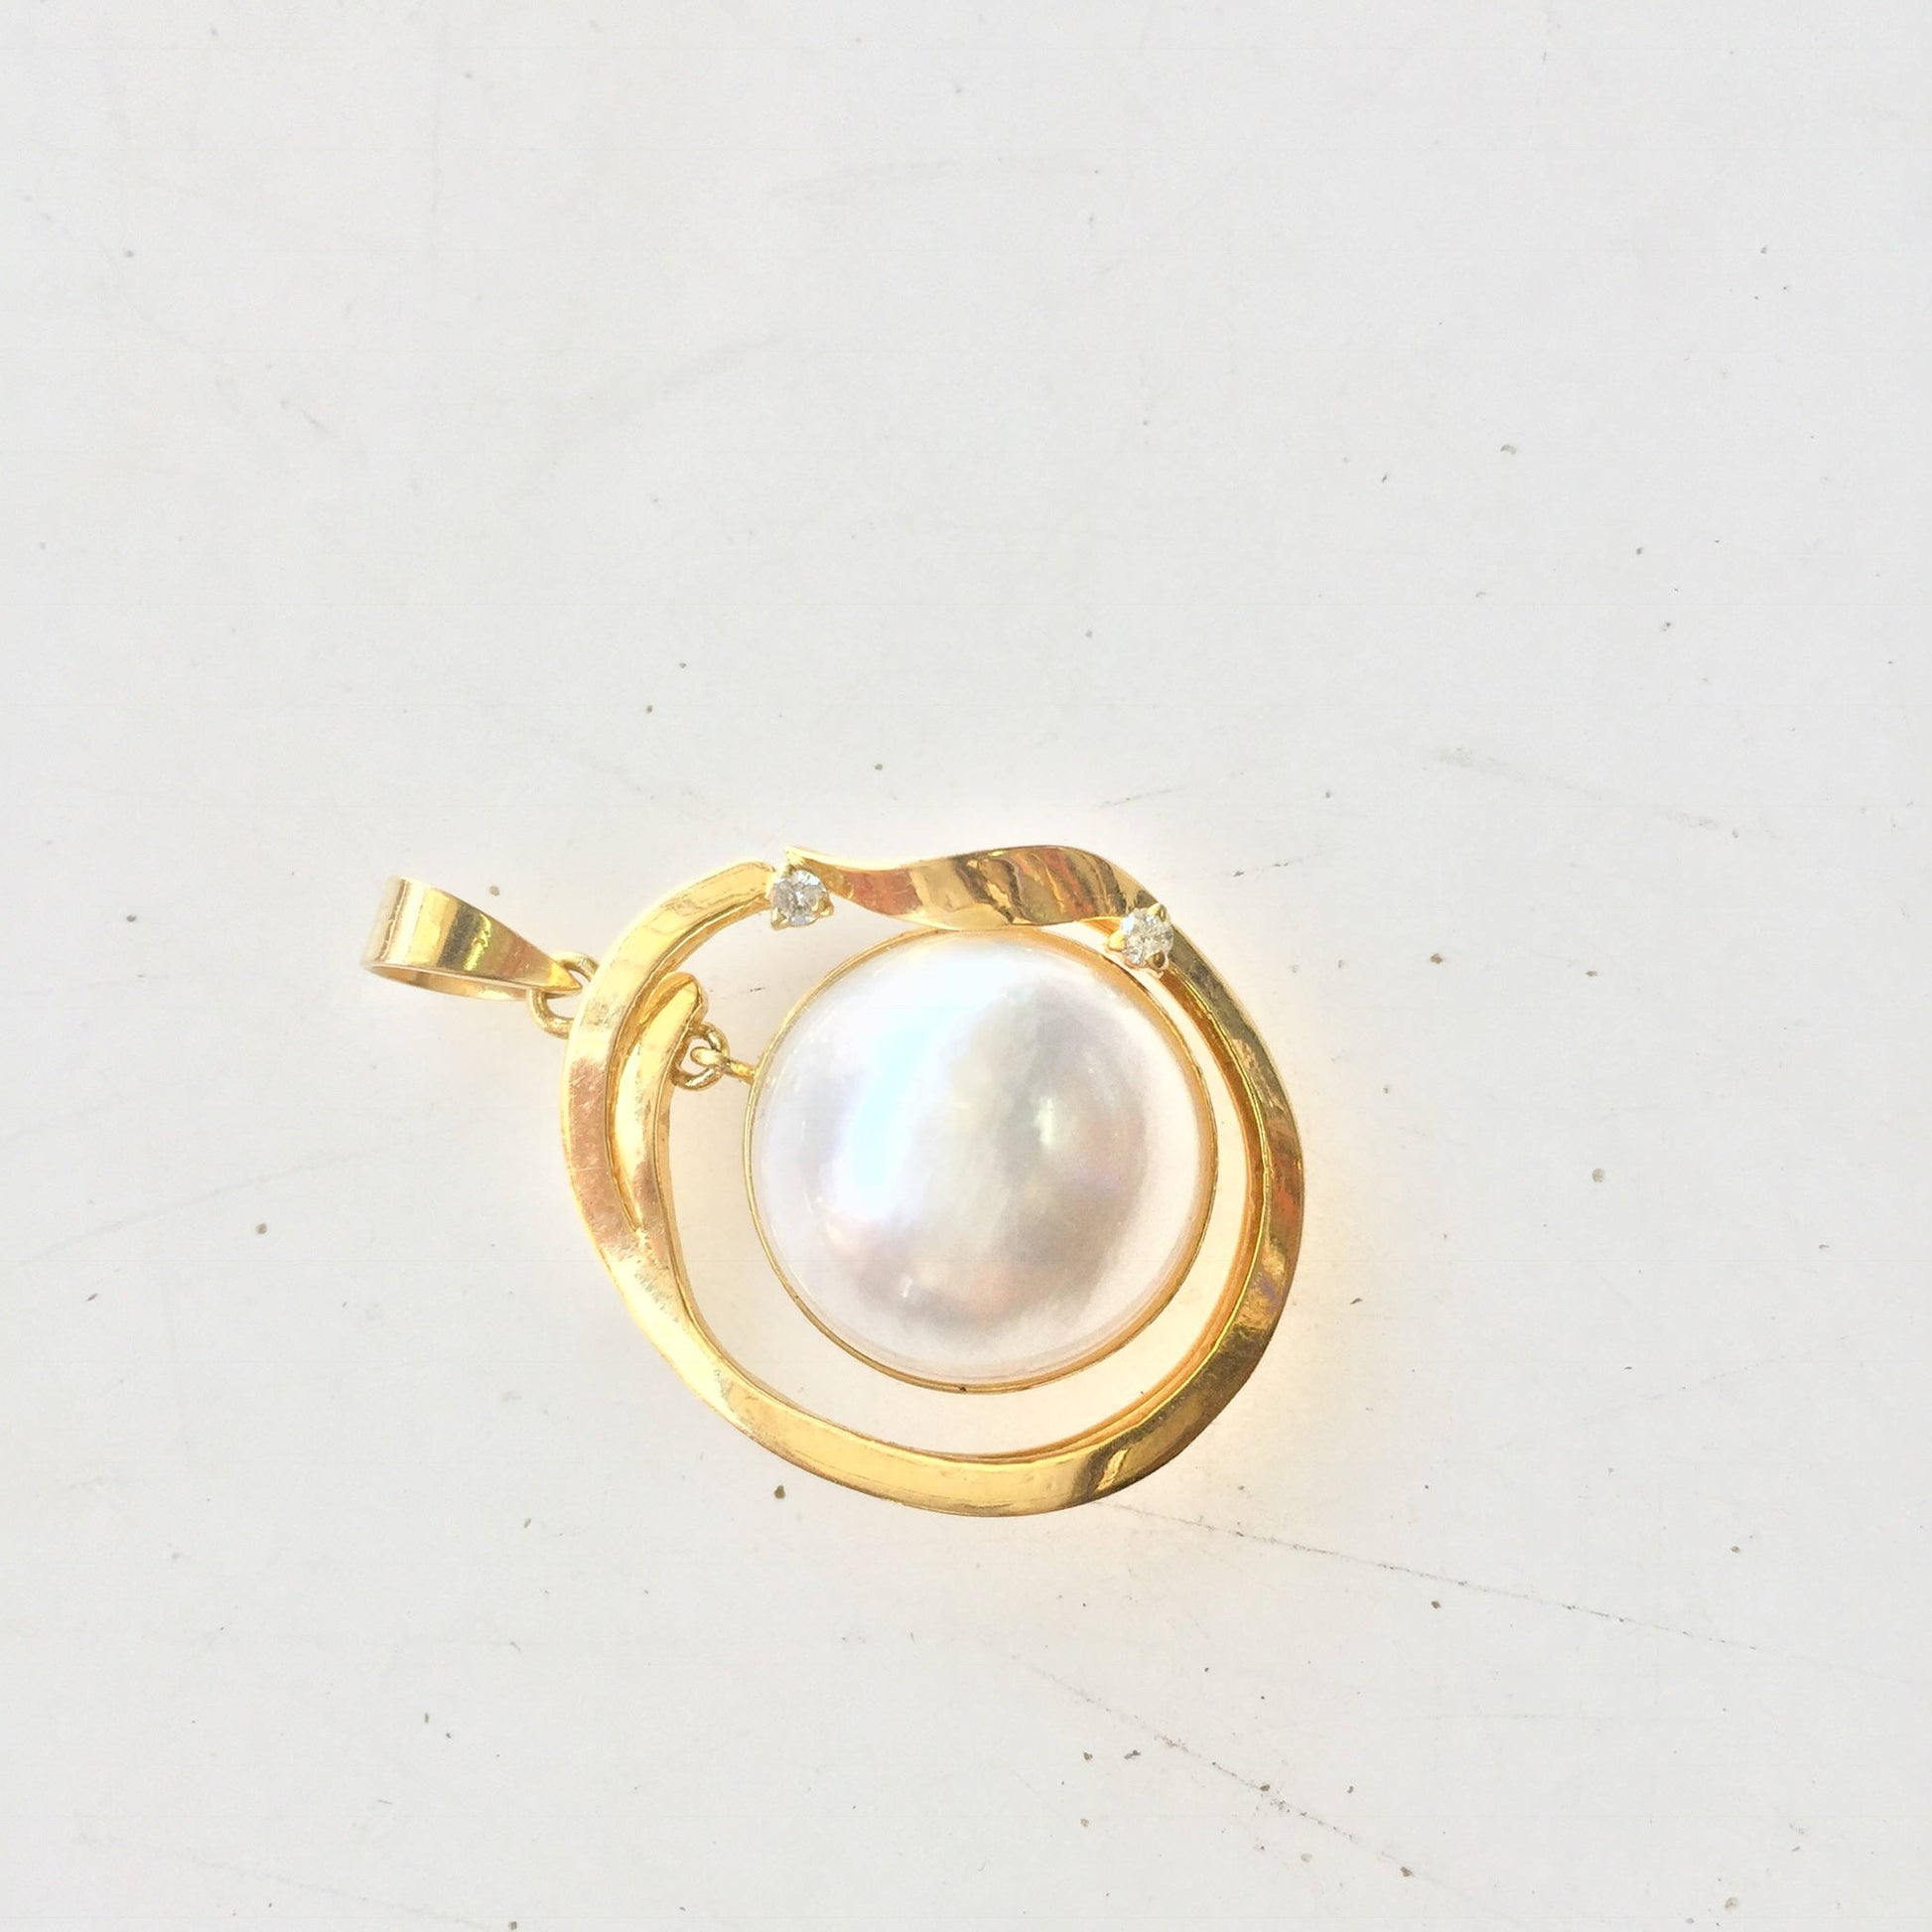 14 karat gold pendant with a lustrous pearl, perfect for bridal jewelry or as a vintage-inspired gift for her.